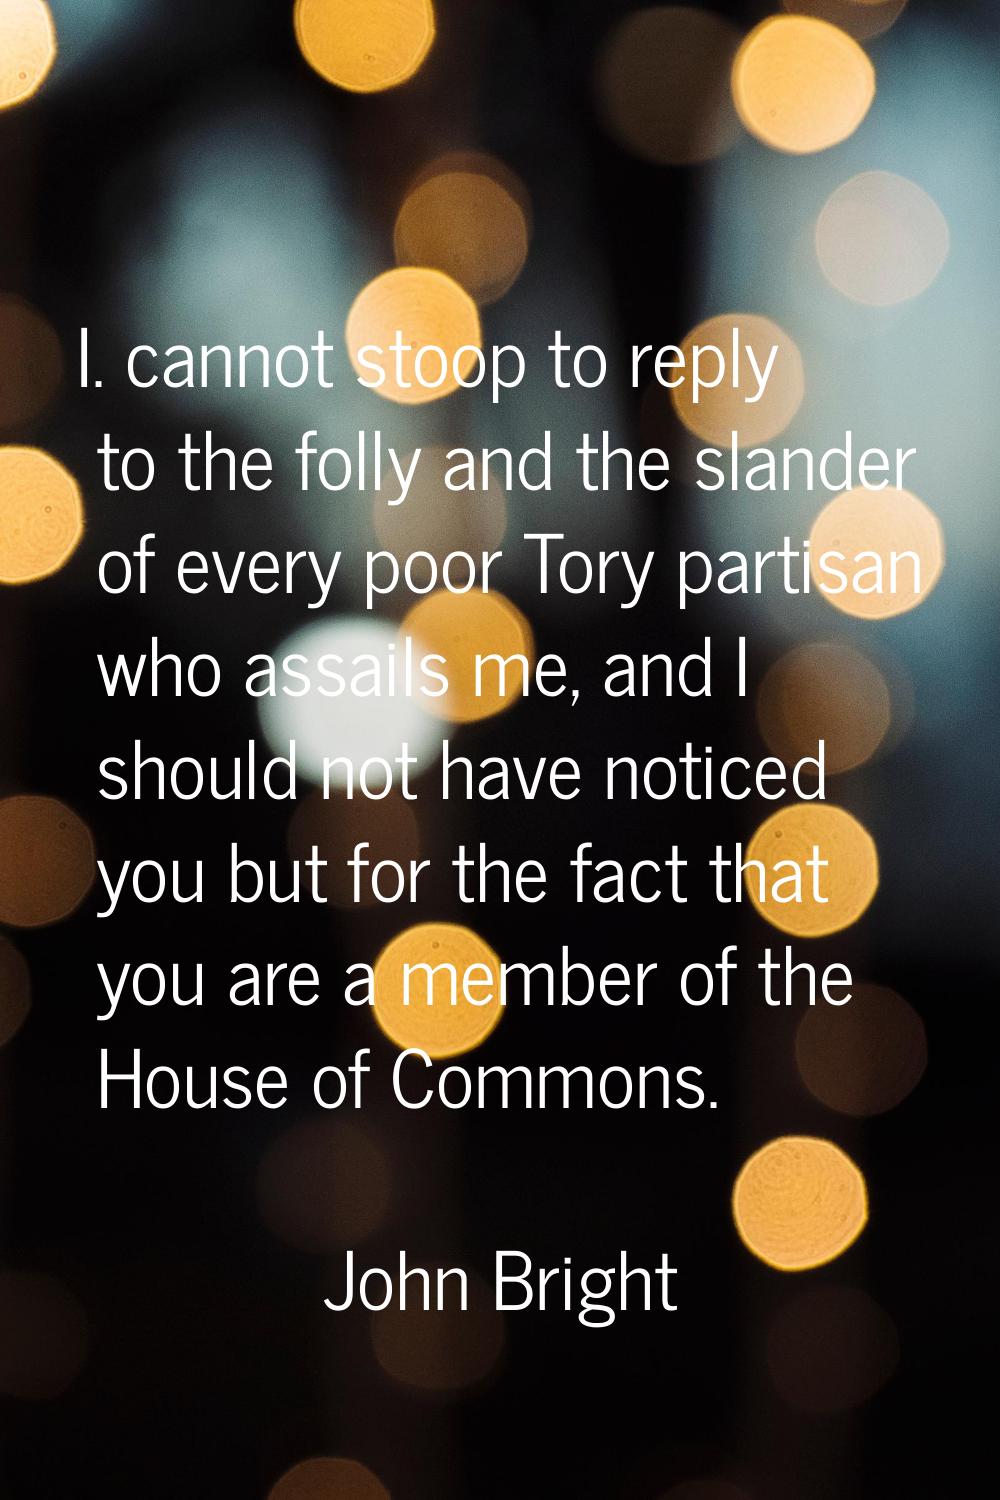 I. cannot stoop to reply to the folly and the slander of every poor Tory partisan who assails me, a